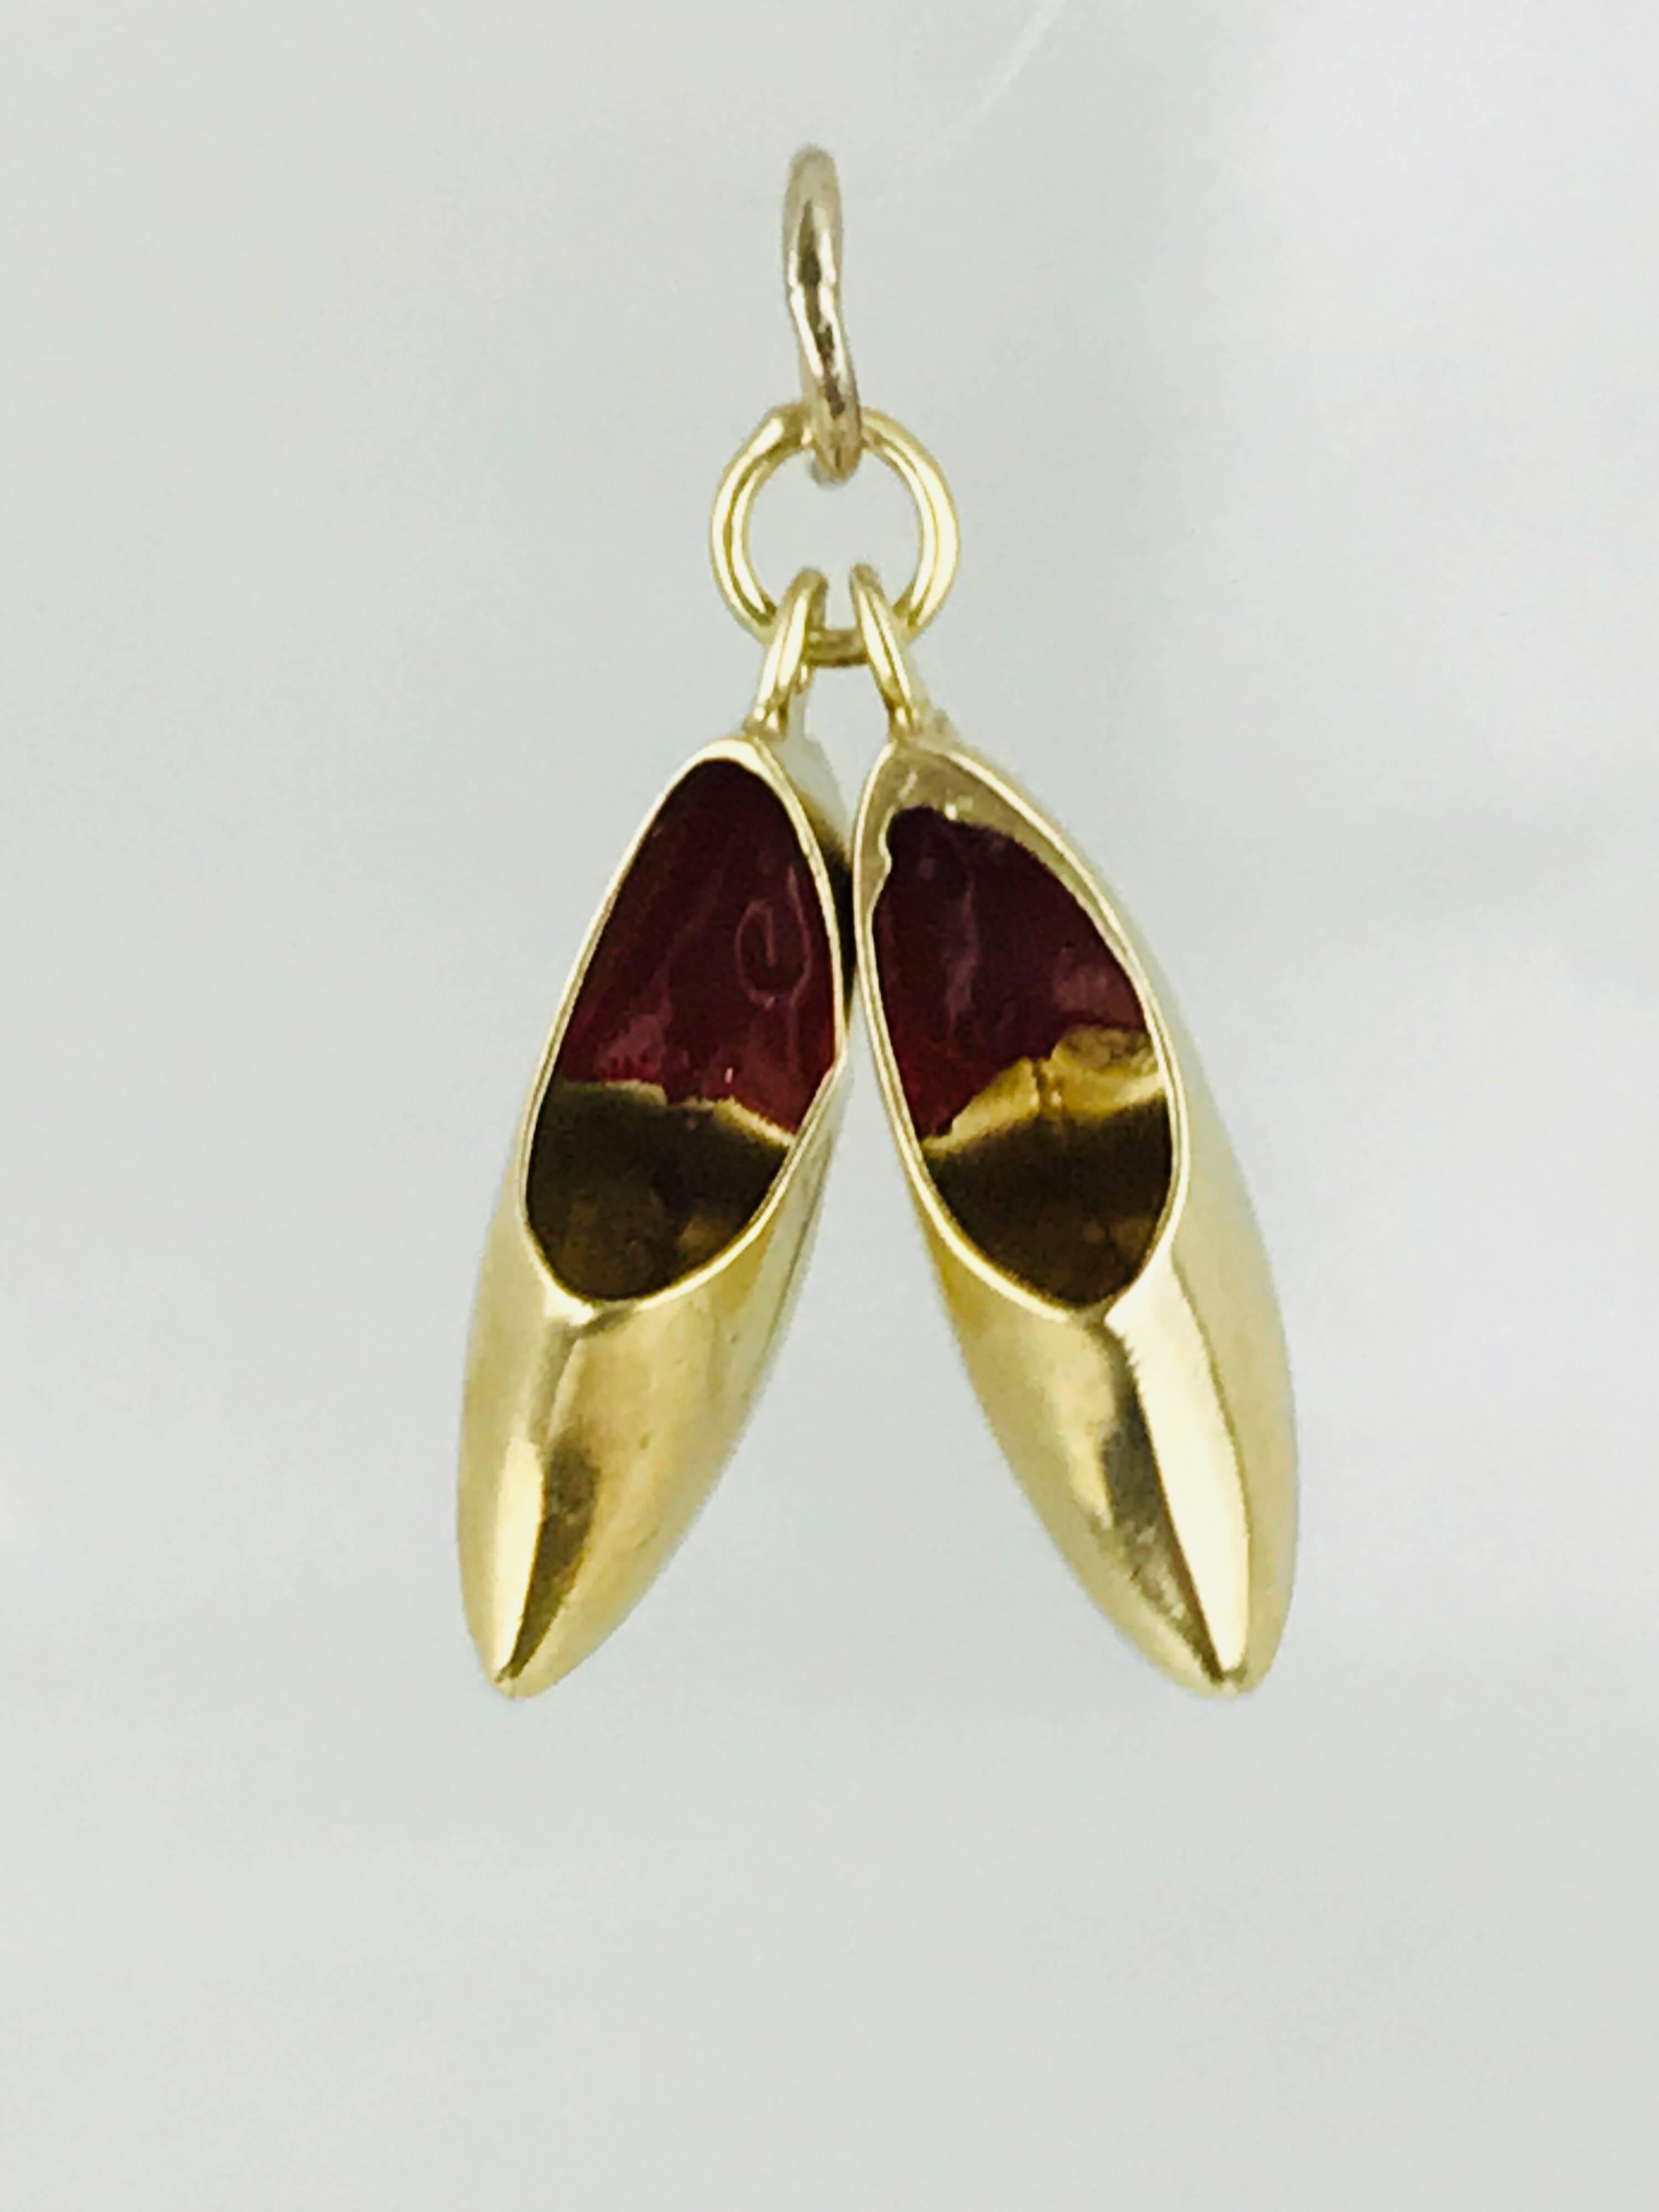 Dutch Shoes with Red Enamel, Charm or Pendant 18 Karat Yellow Gold, circa 1950 In Excellent Condition For Sale In Aliso Viejo, CA